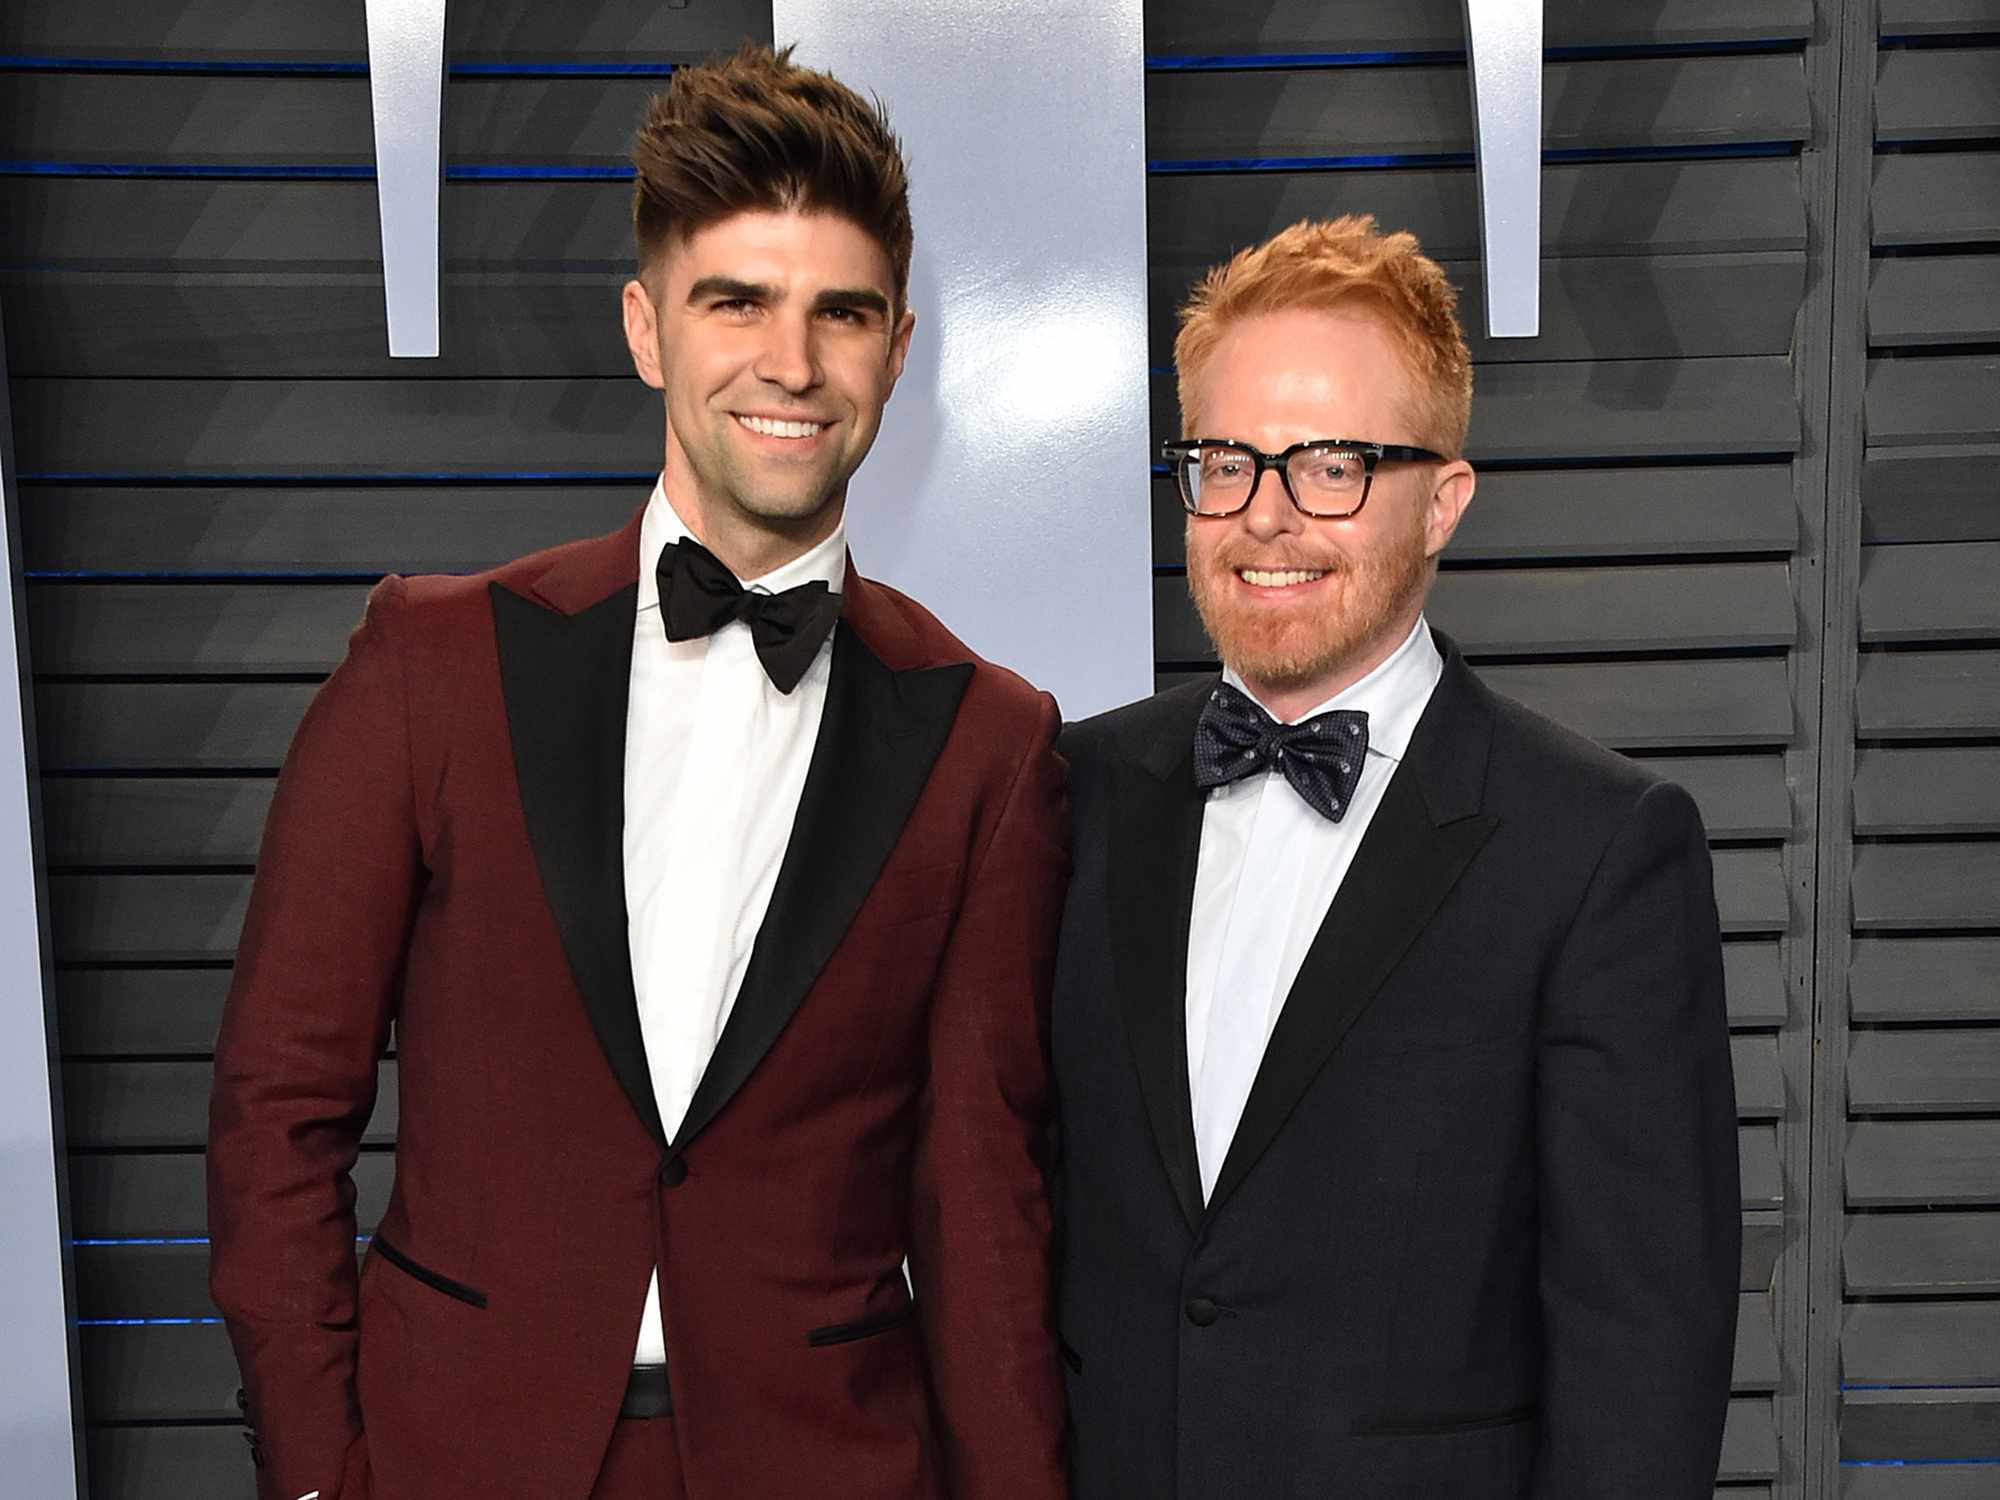 Justin Mikita (L) and actor Jesse Tyler Ferguson attend the 2018 Vanity Fair Oscar Party hosted by Radhika Jones at Wallis Annenberg Center for the Performing Arts on March 4, 2018 in Beverly Hills, California